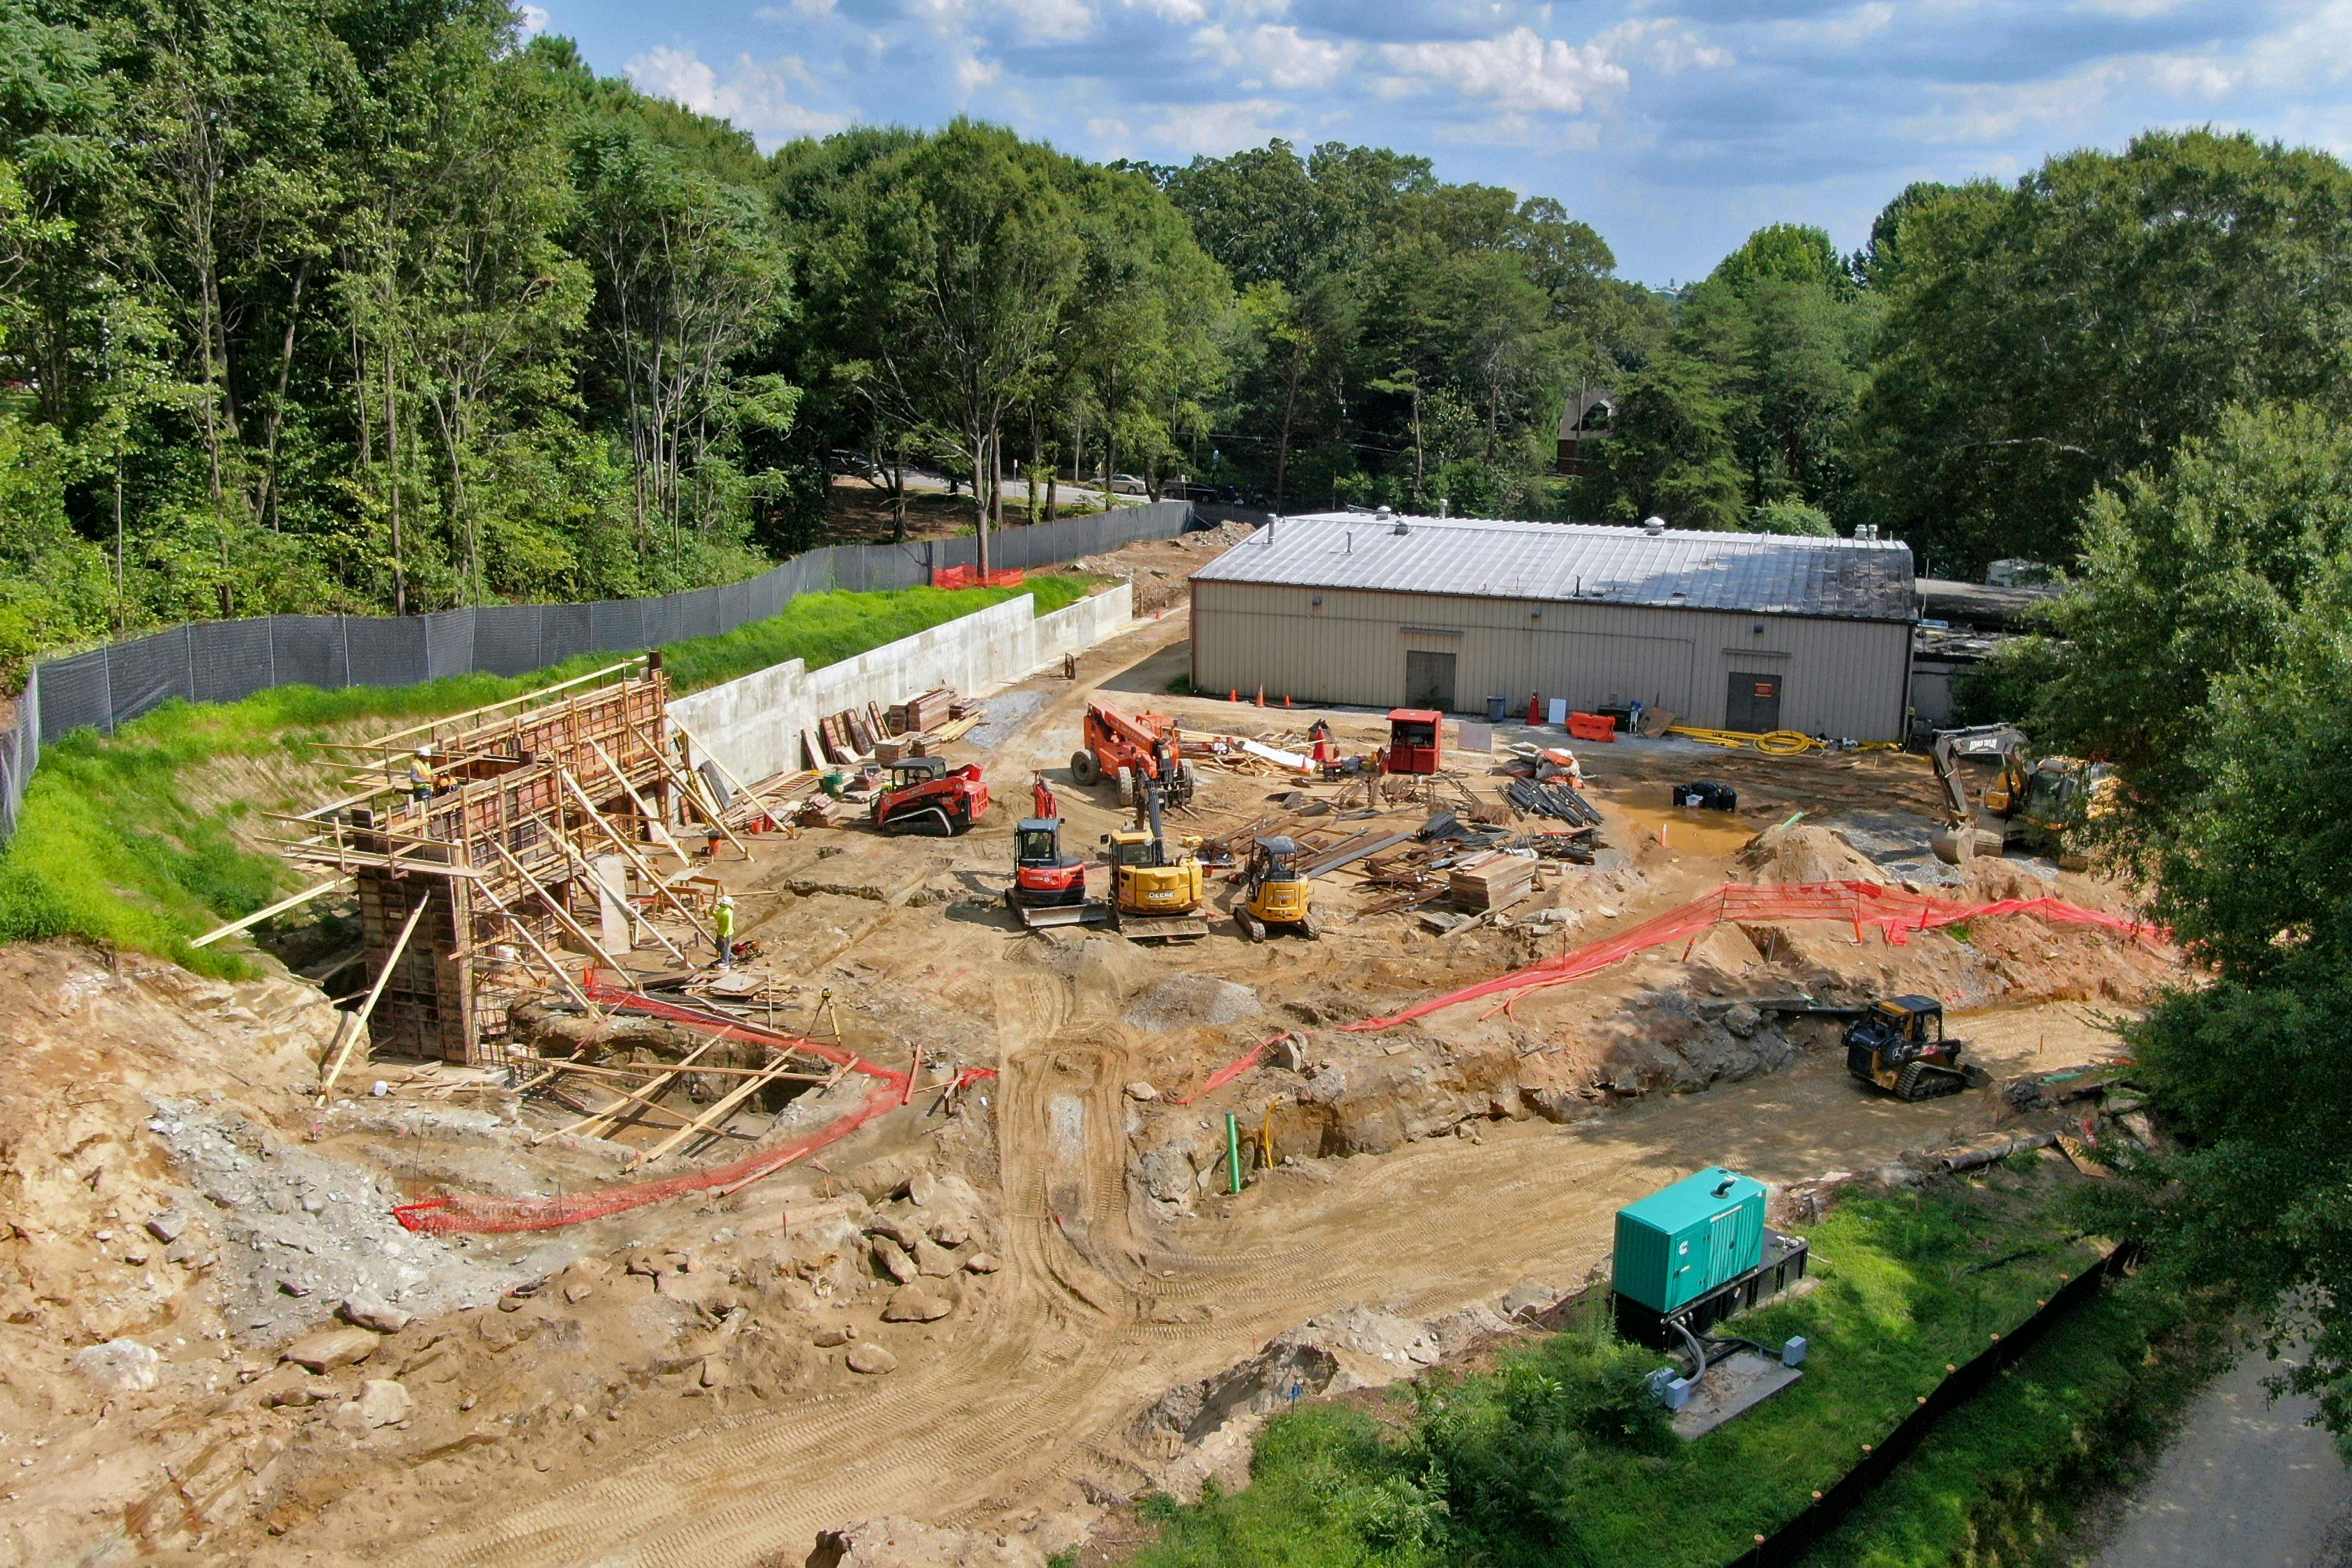 Drone footage from the groundbreaking ceremony (Image courtesy of Zoo Atlanta)